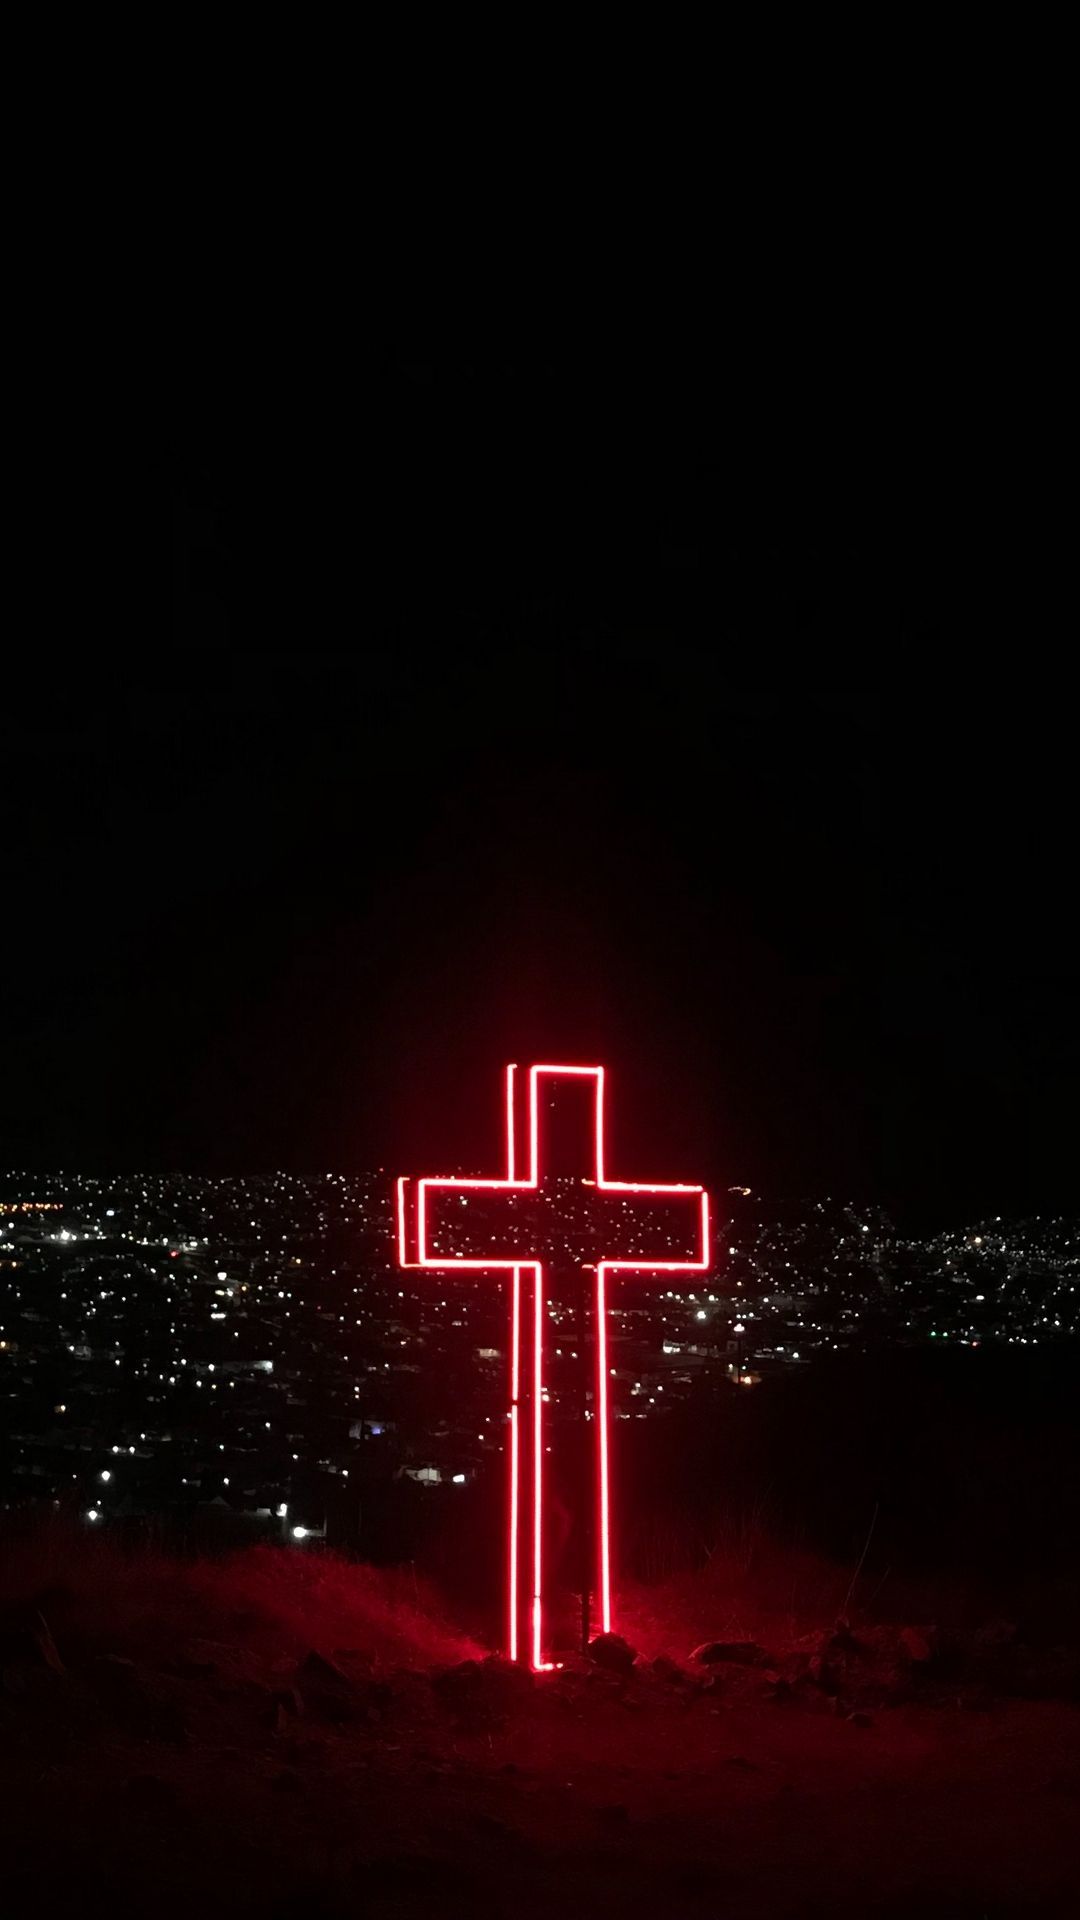 1080x1920 Cross Wallpaper Background Hupages Download Iphone Wallpaper Cross Wallpaper Christian Iphone Wallpaper Worship Wallpaper